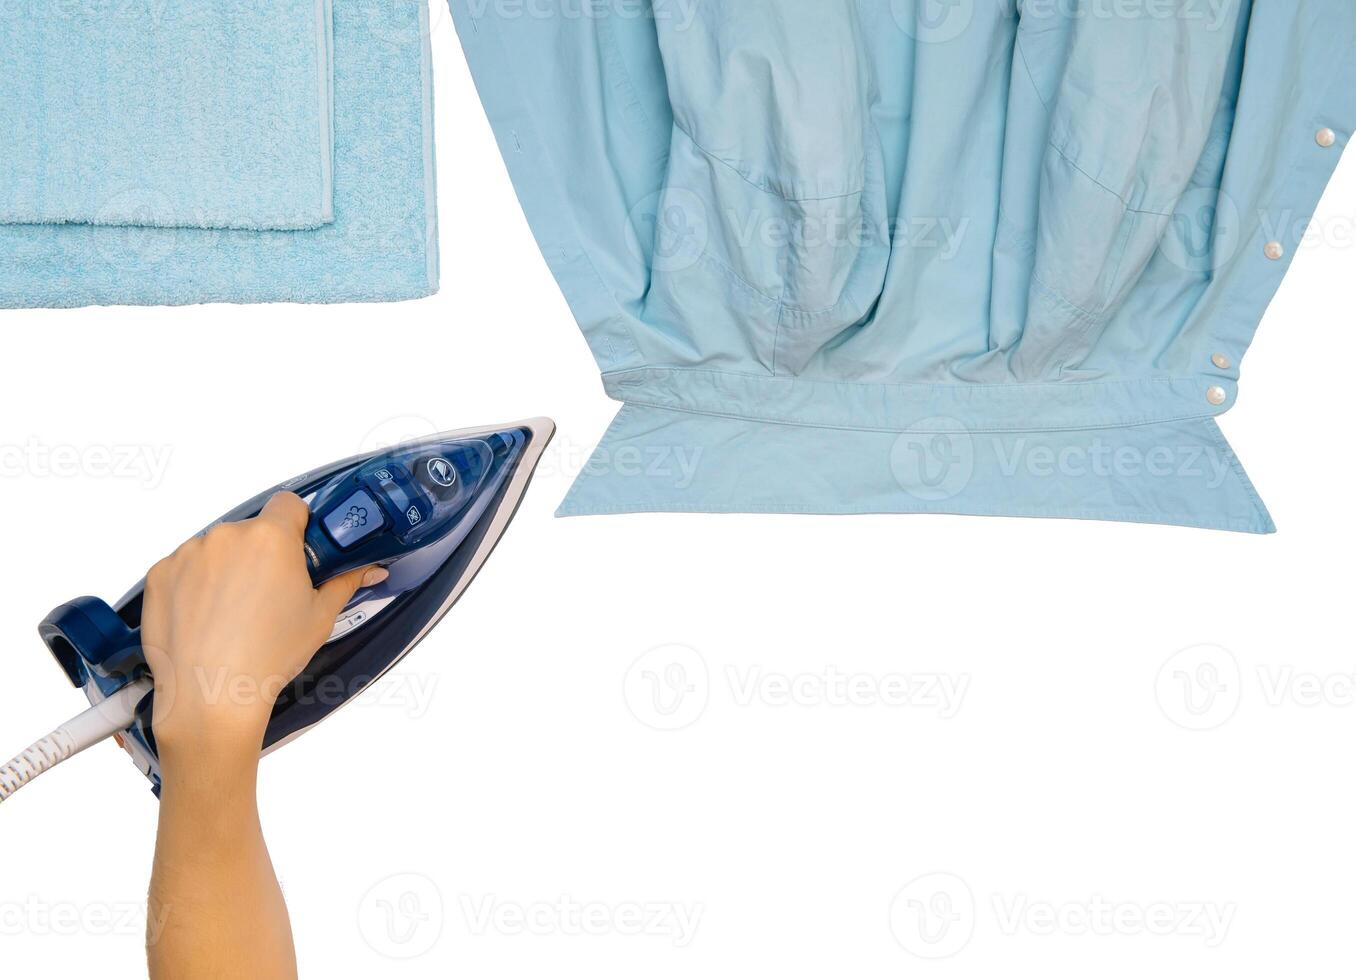 Female hand ironing clothes top view isolated on white background. Young woman with iron ironing man's shirt seen from above during housework. Blue iron on white table photo